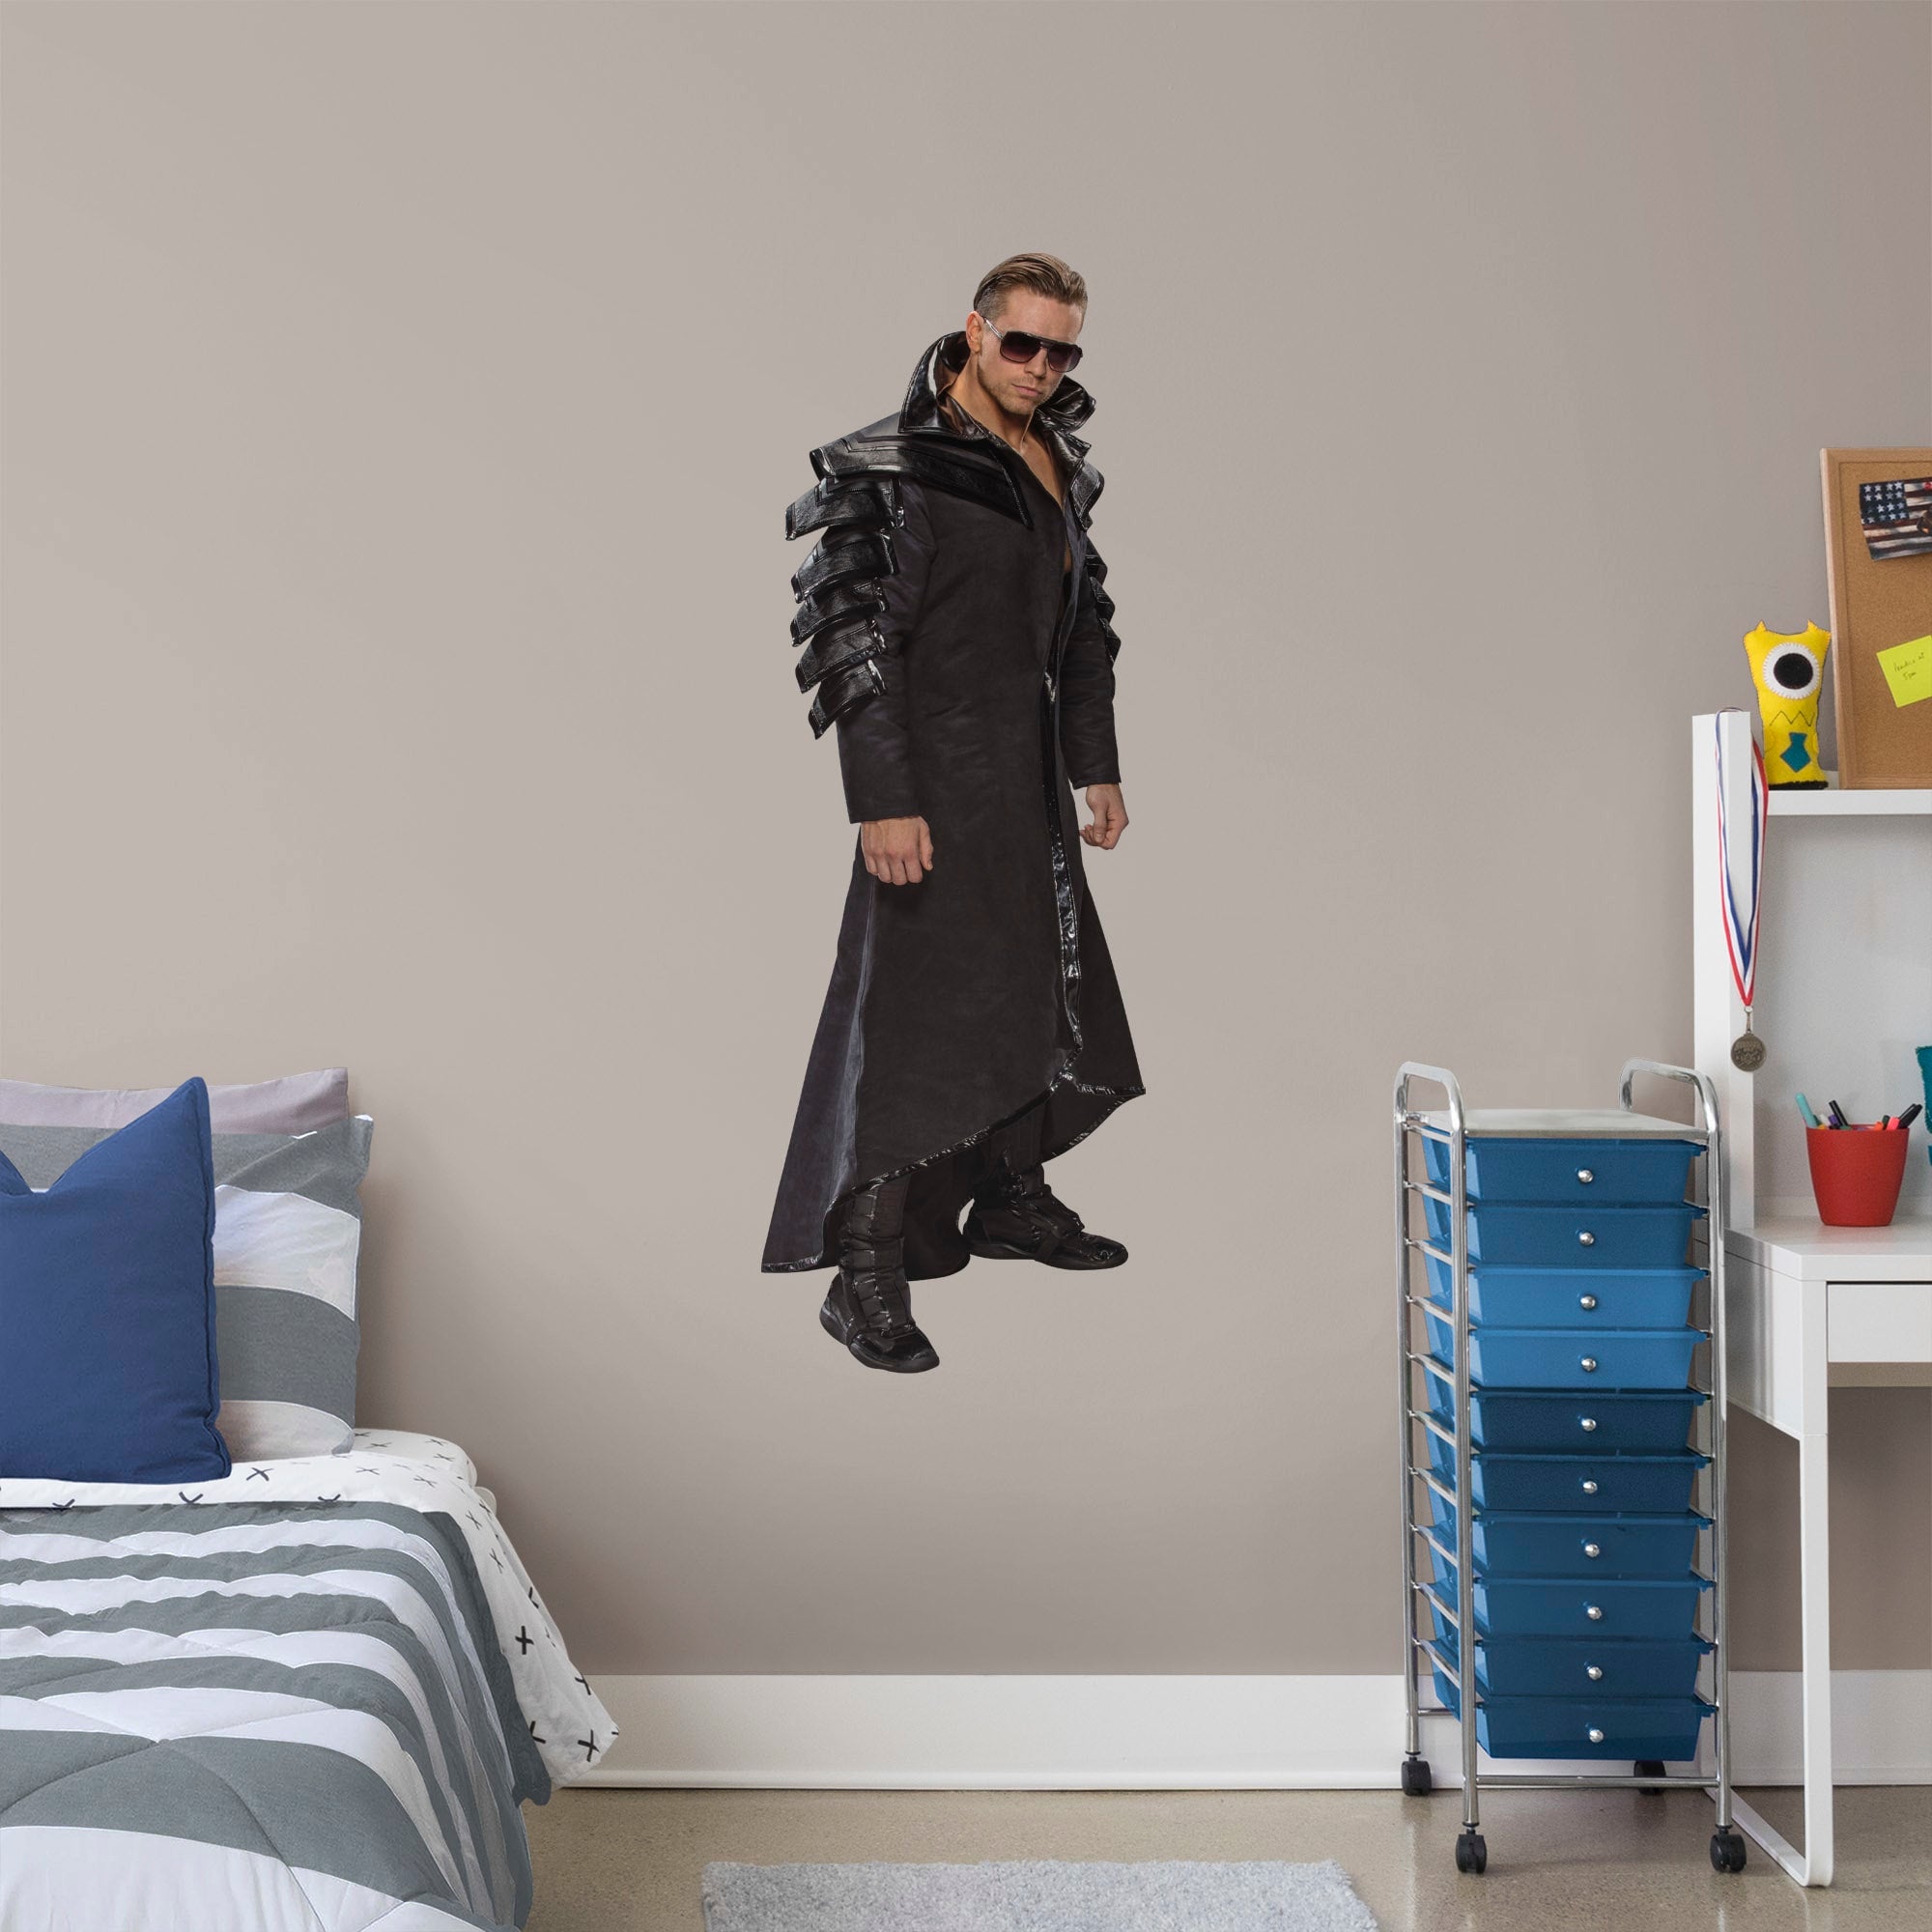 The Miz for WWE - Officially Licensed Removable Wall Decal Giant Superstar + 2 Decals (17"W x 51"H) by Fathead | Vinyl